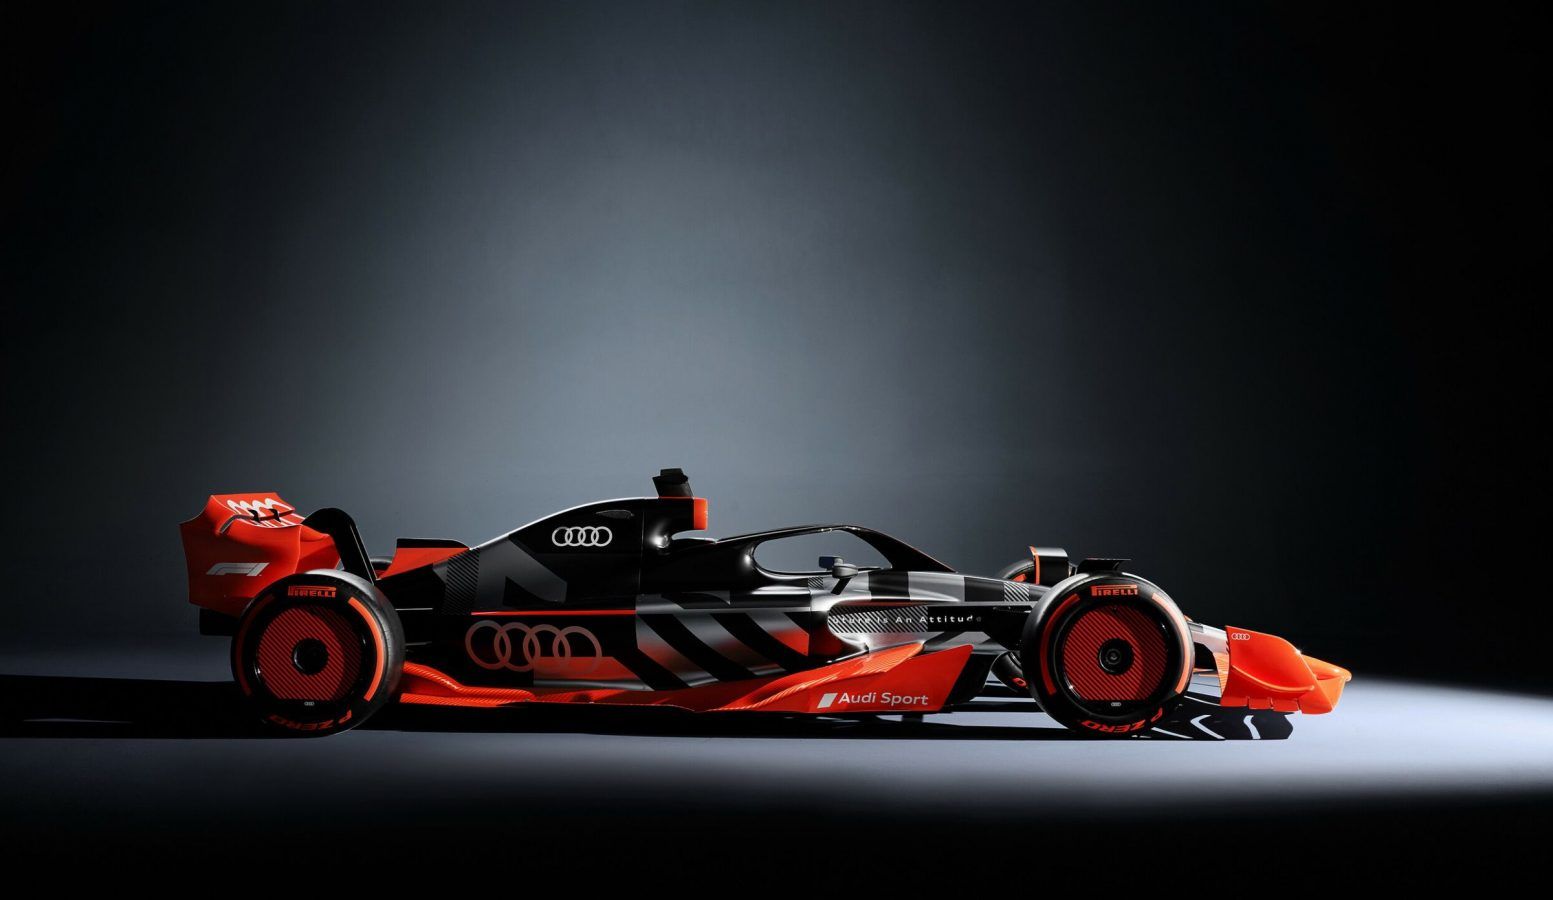 Audi Will Officially Race in Formula 1 Starting with the 2026 Season